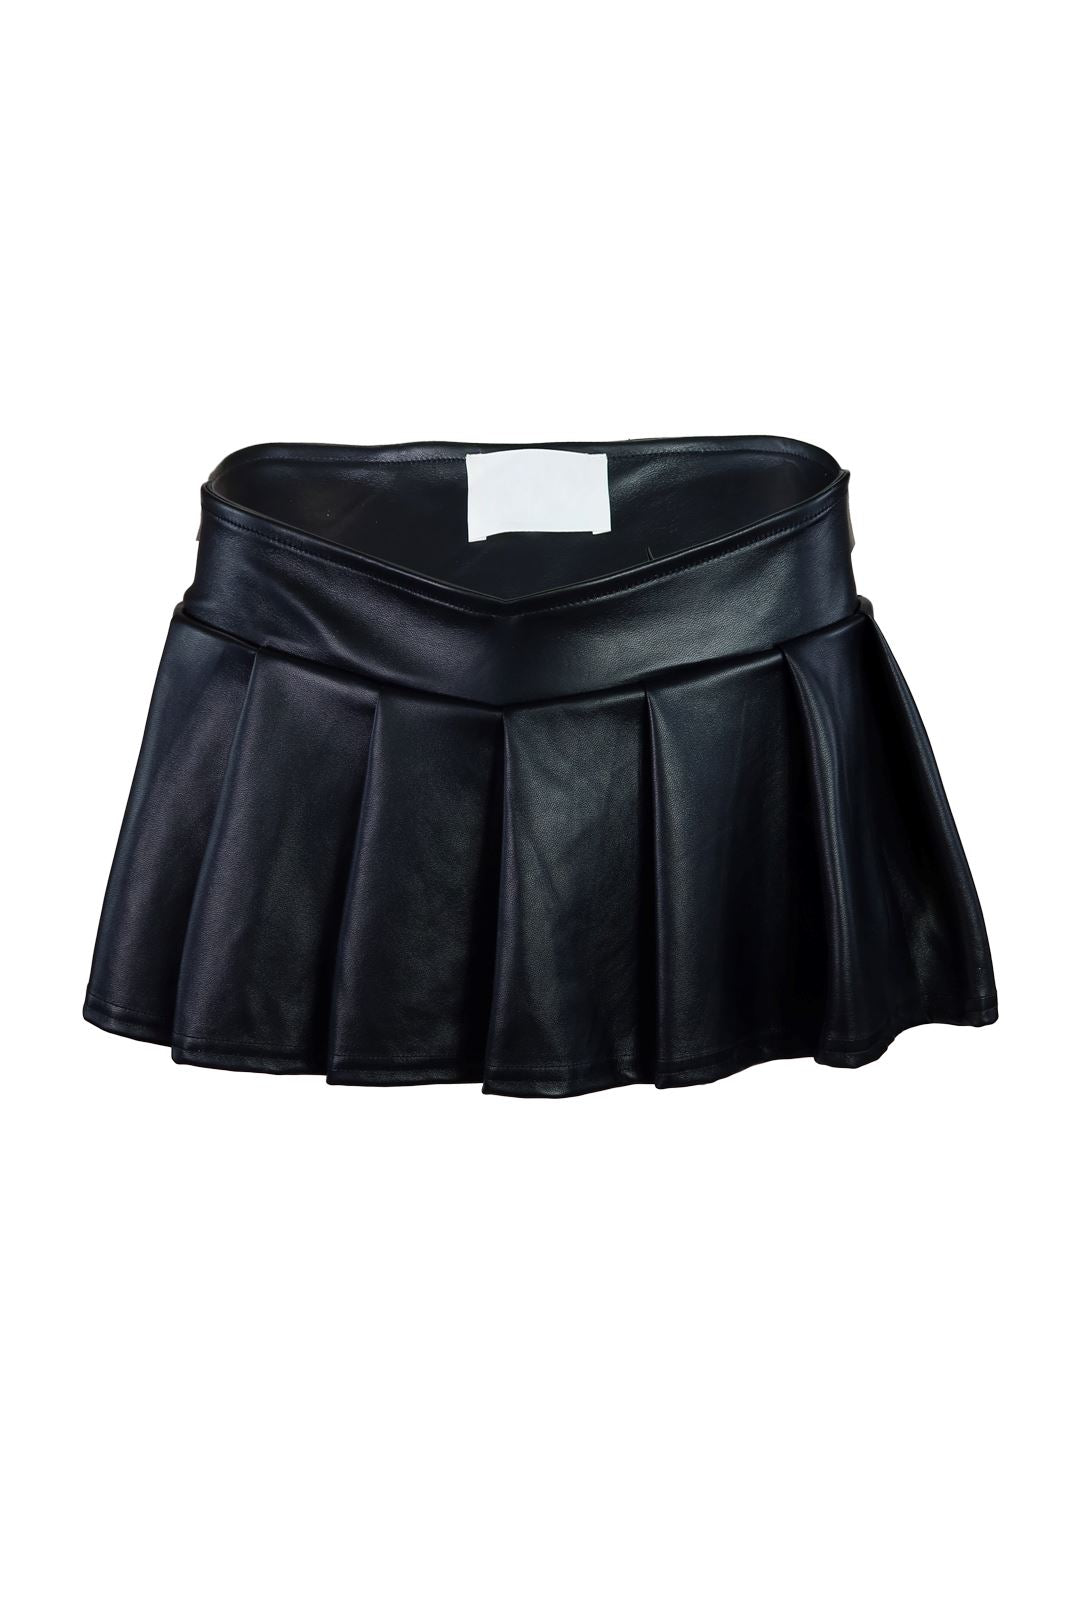 I know It Low Rise Pleated PU Skirt